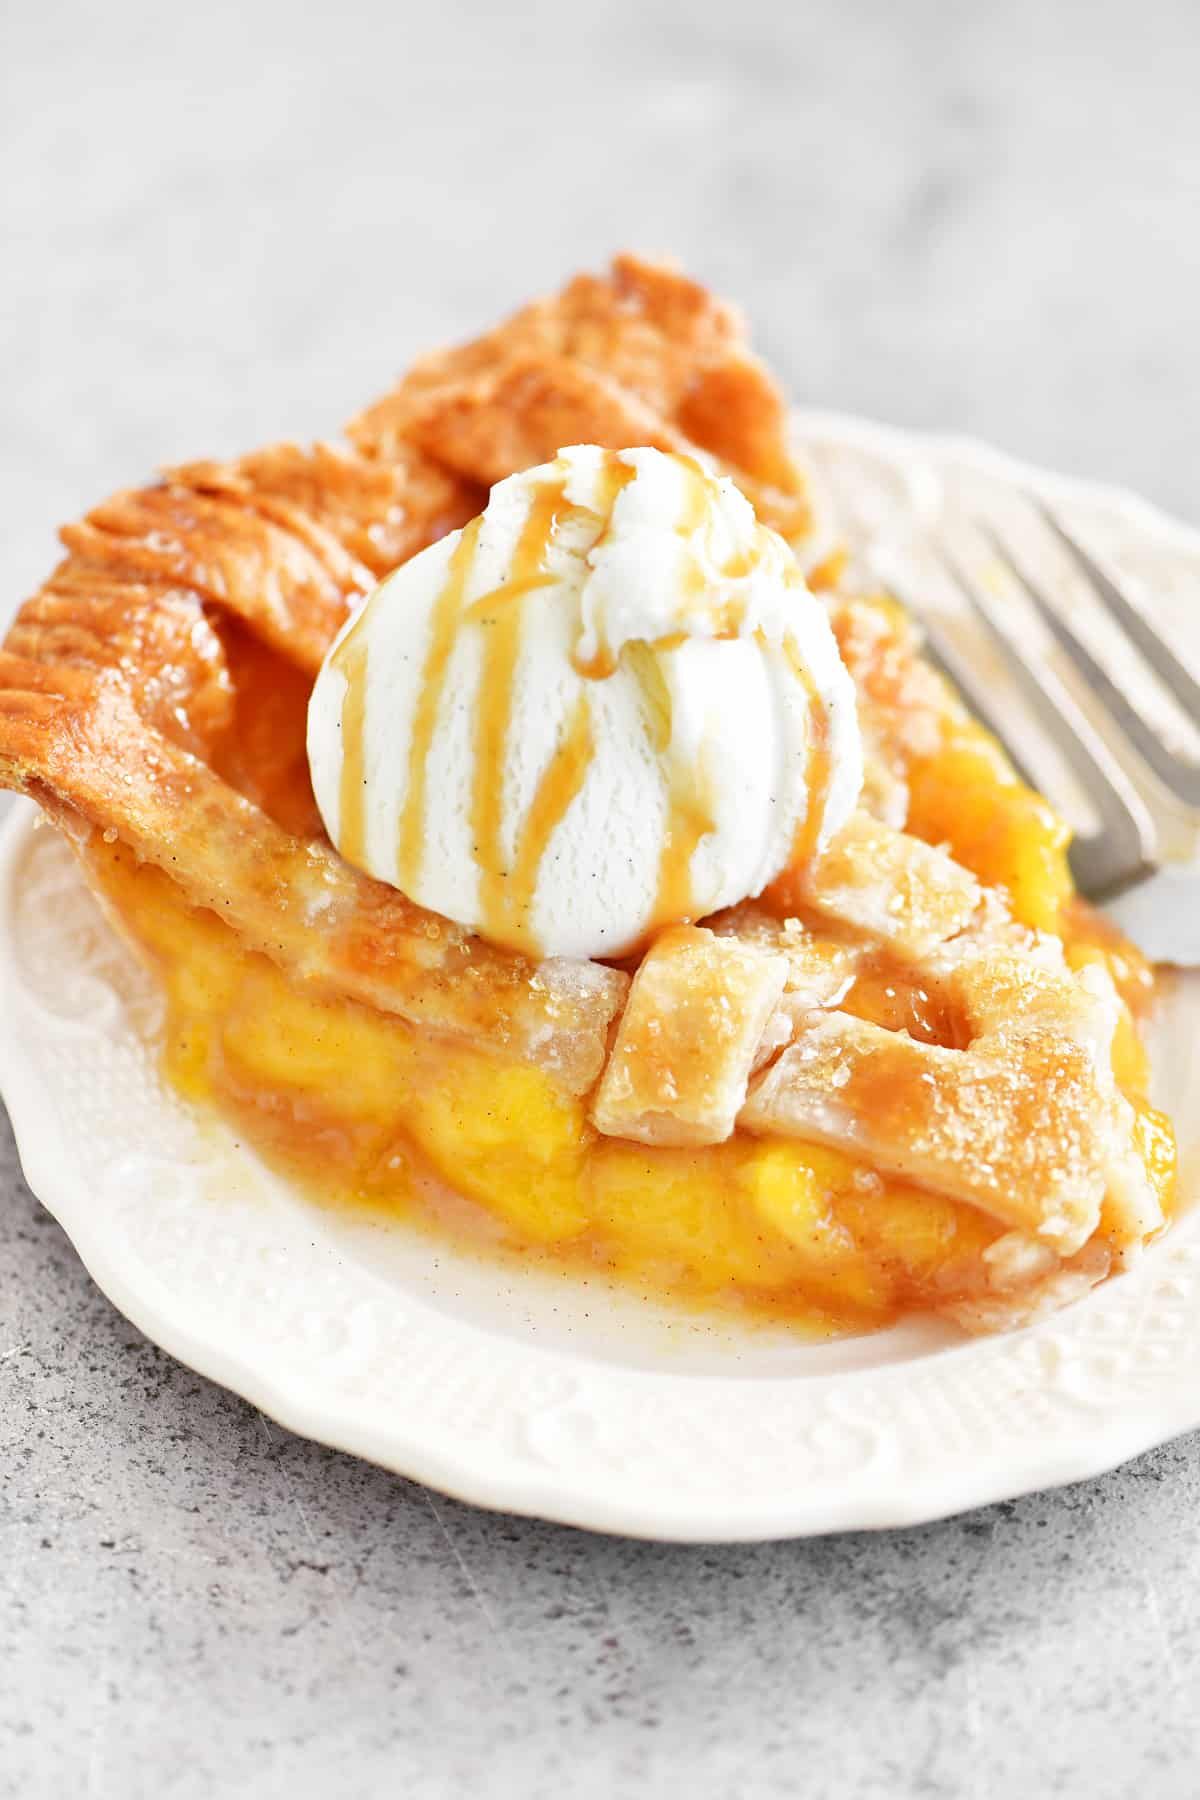 This Peach Pie recipe is easy to make with fresh peaches ...